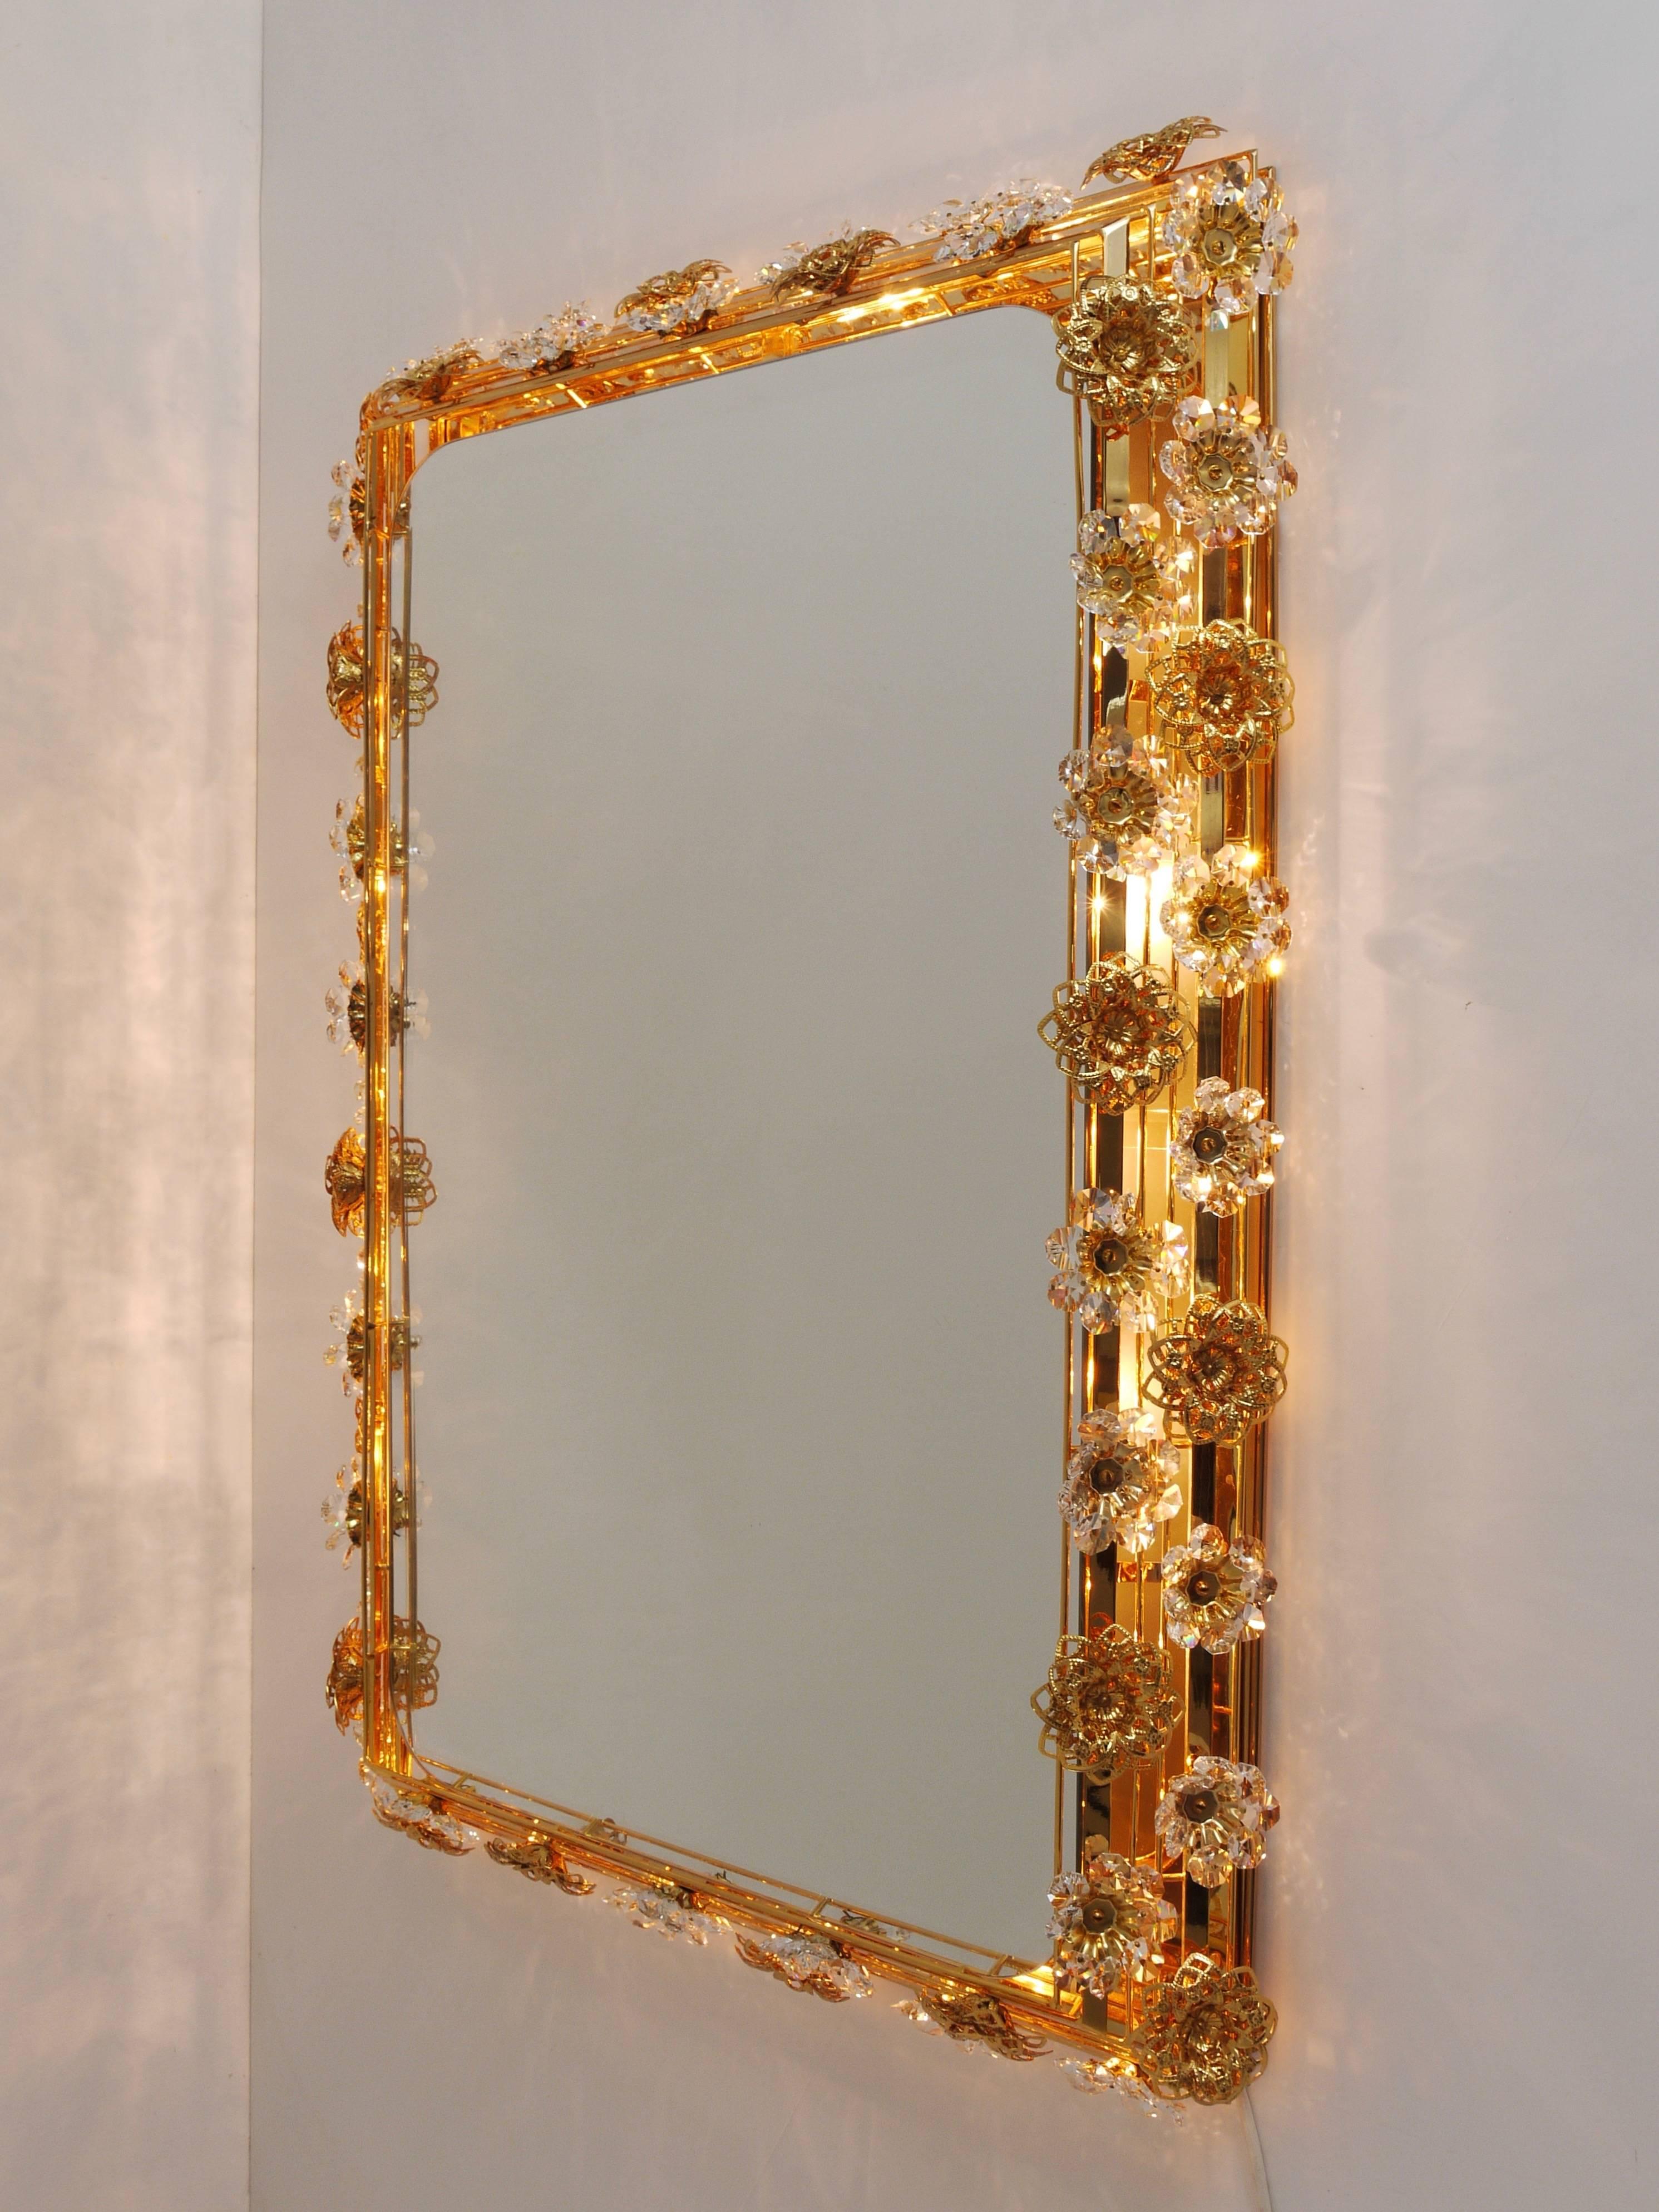 German Ernst Palme Palwa Large Illuminated Flower Wall Mirror, Brass & Crystals, 1970s For Sale